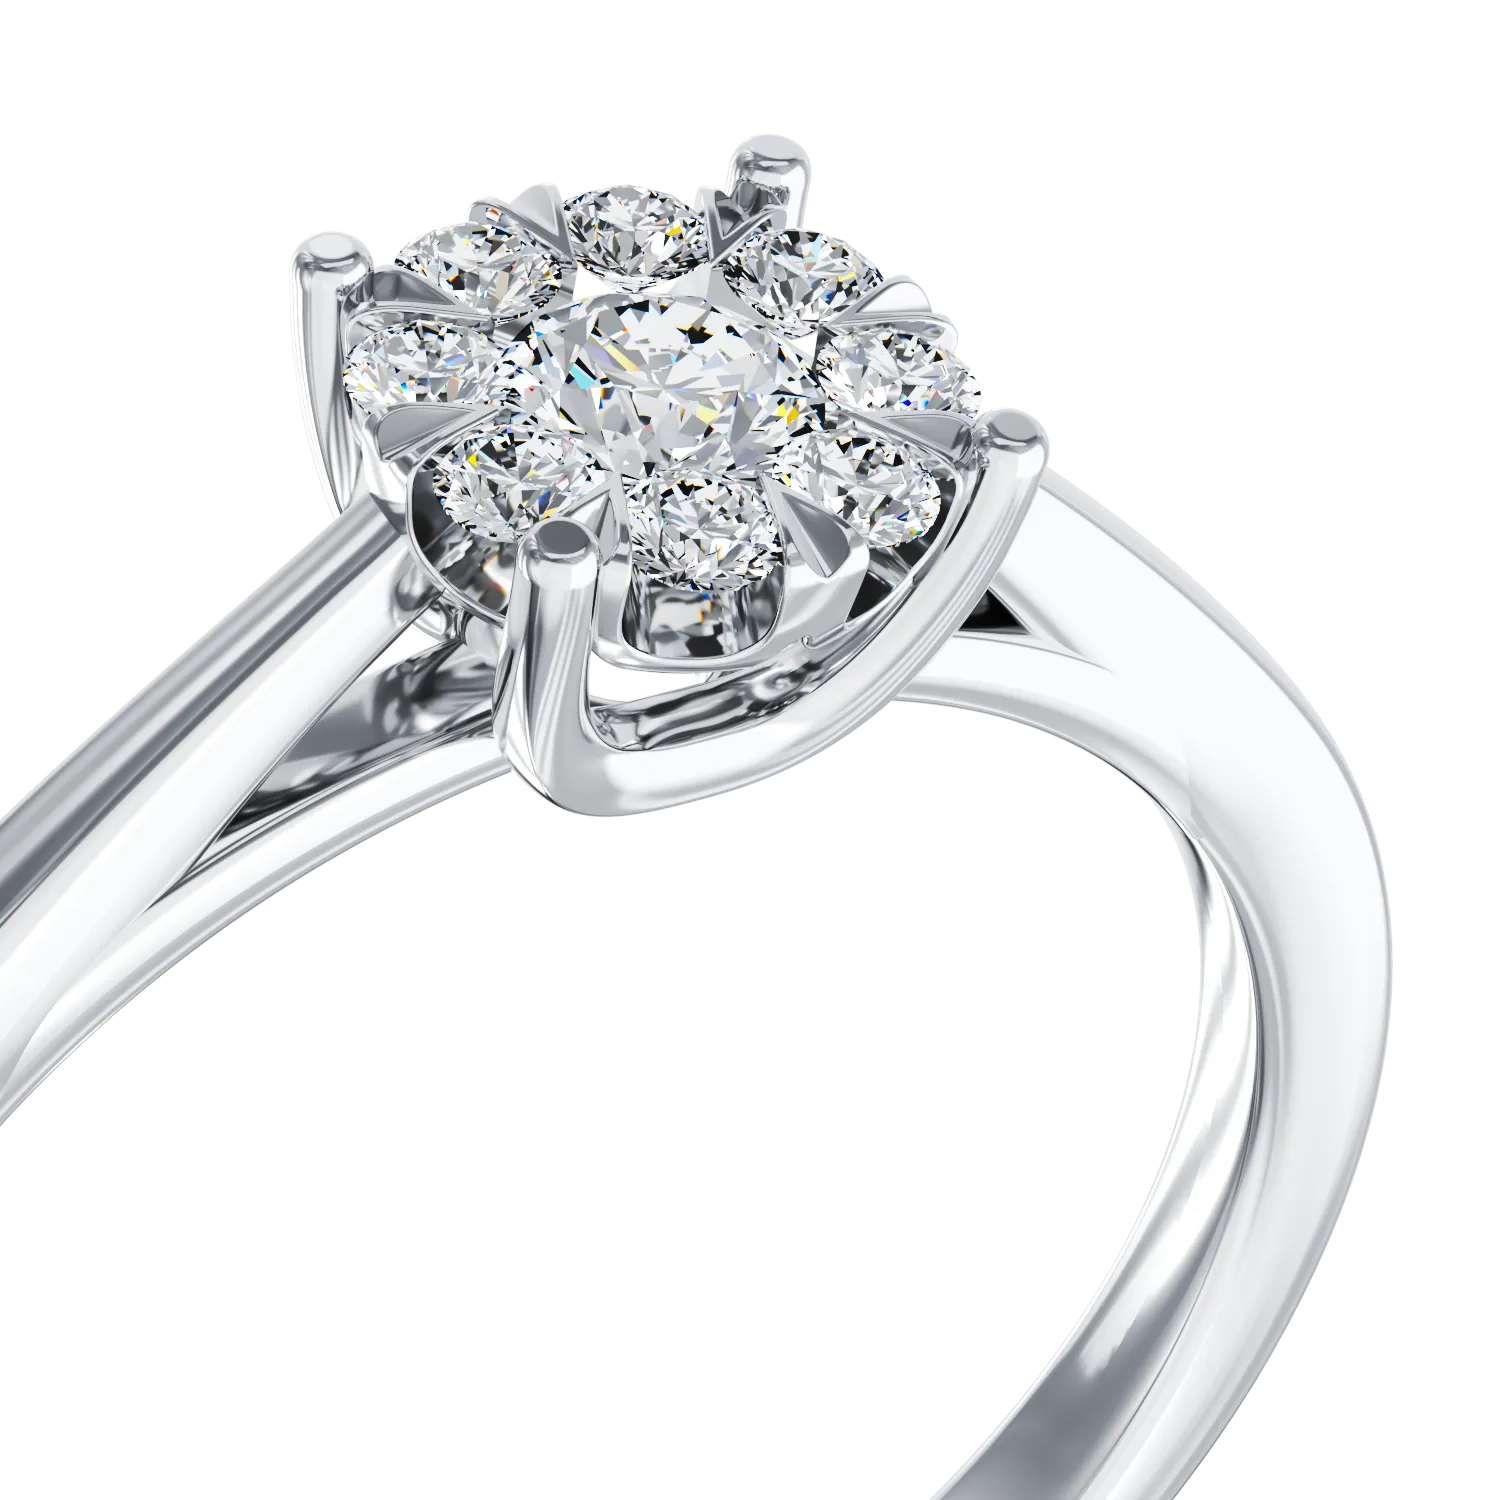 White gold engagement ring with 0.15ct diamonds